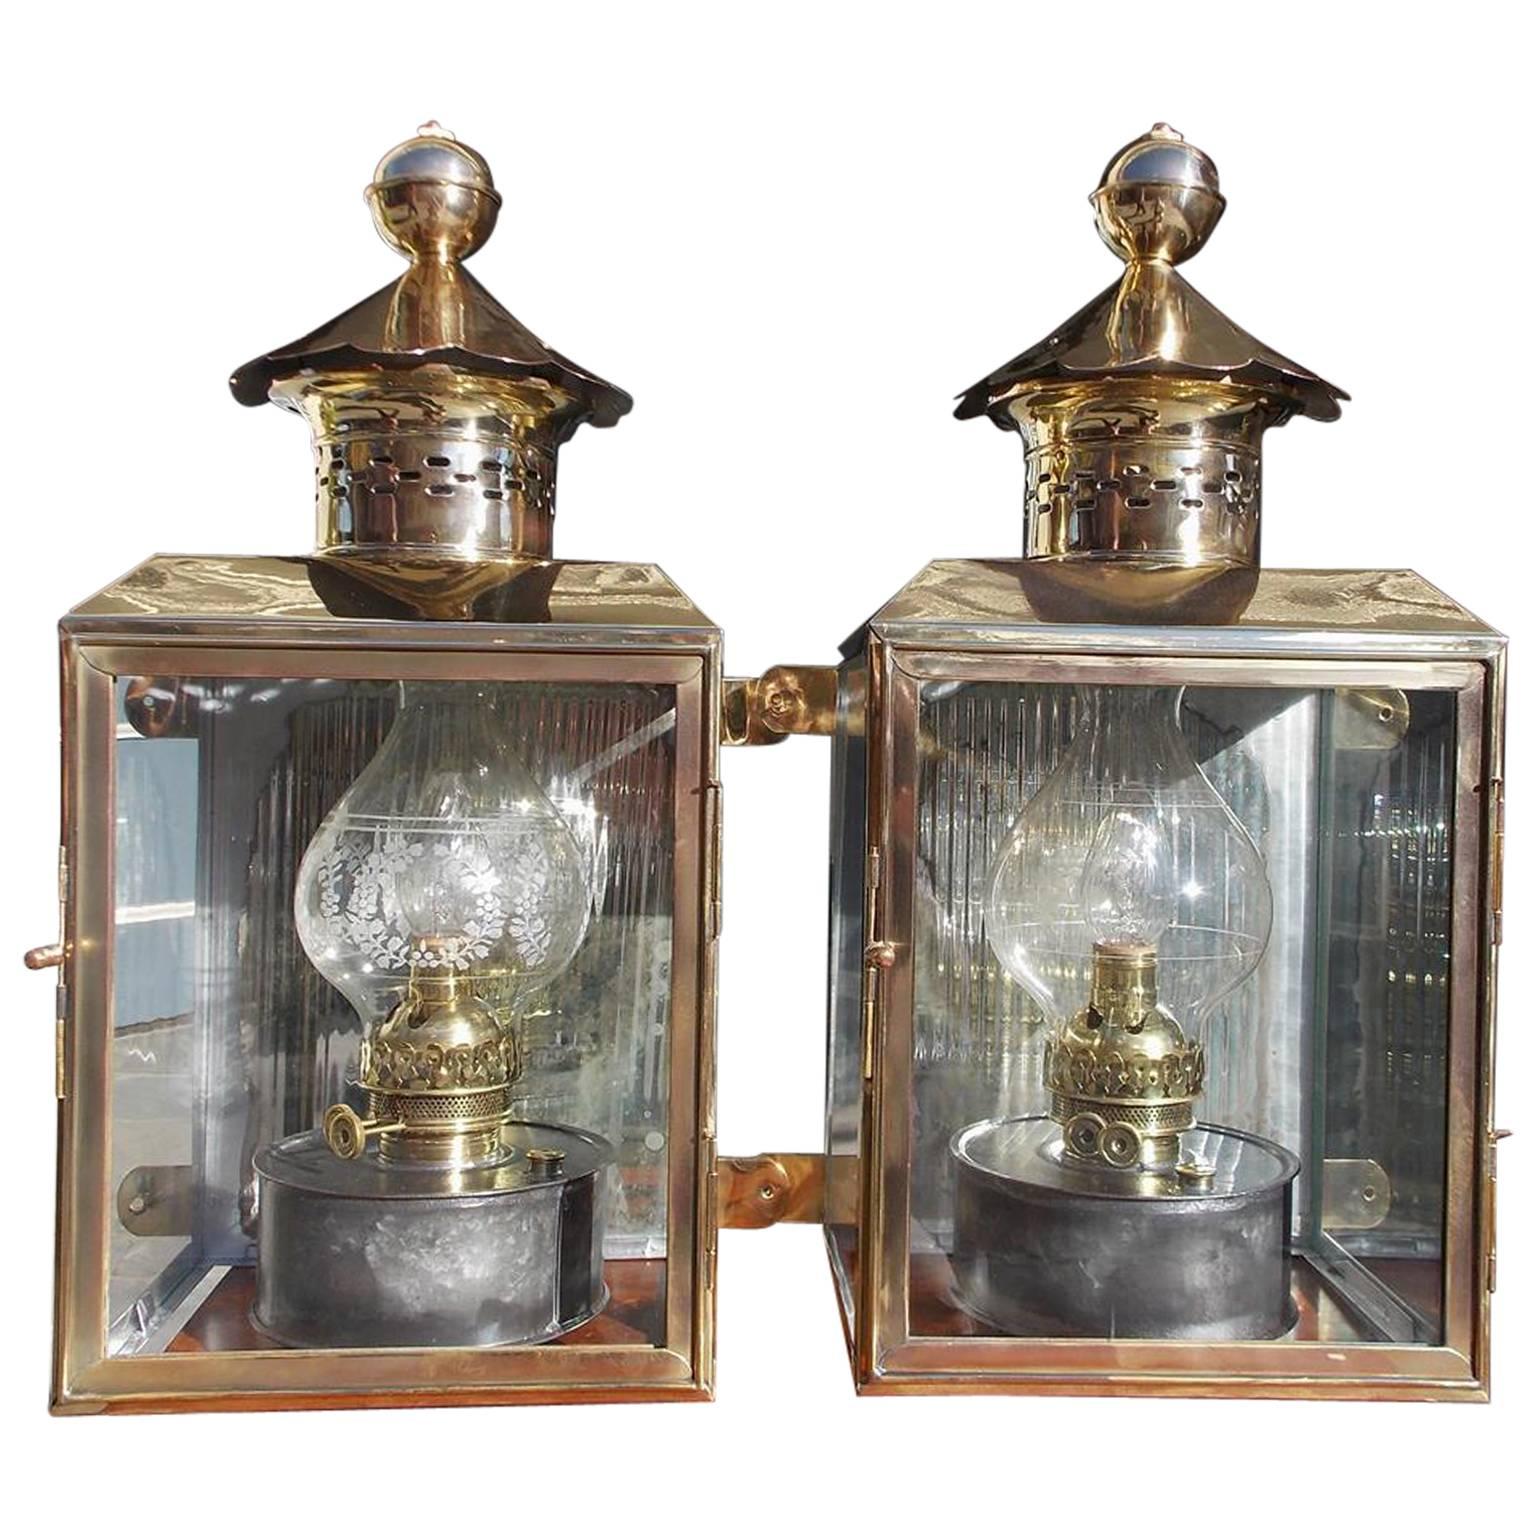 Pair of American Brass and Polished Steel Wall Lanterns, Circa 1880